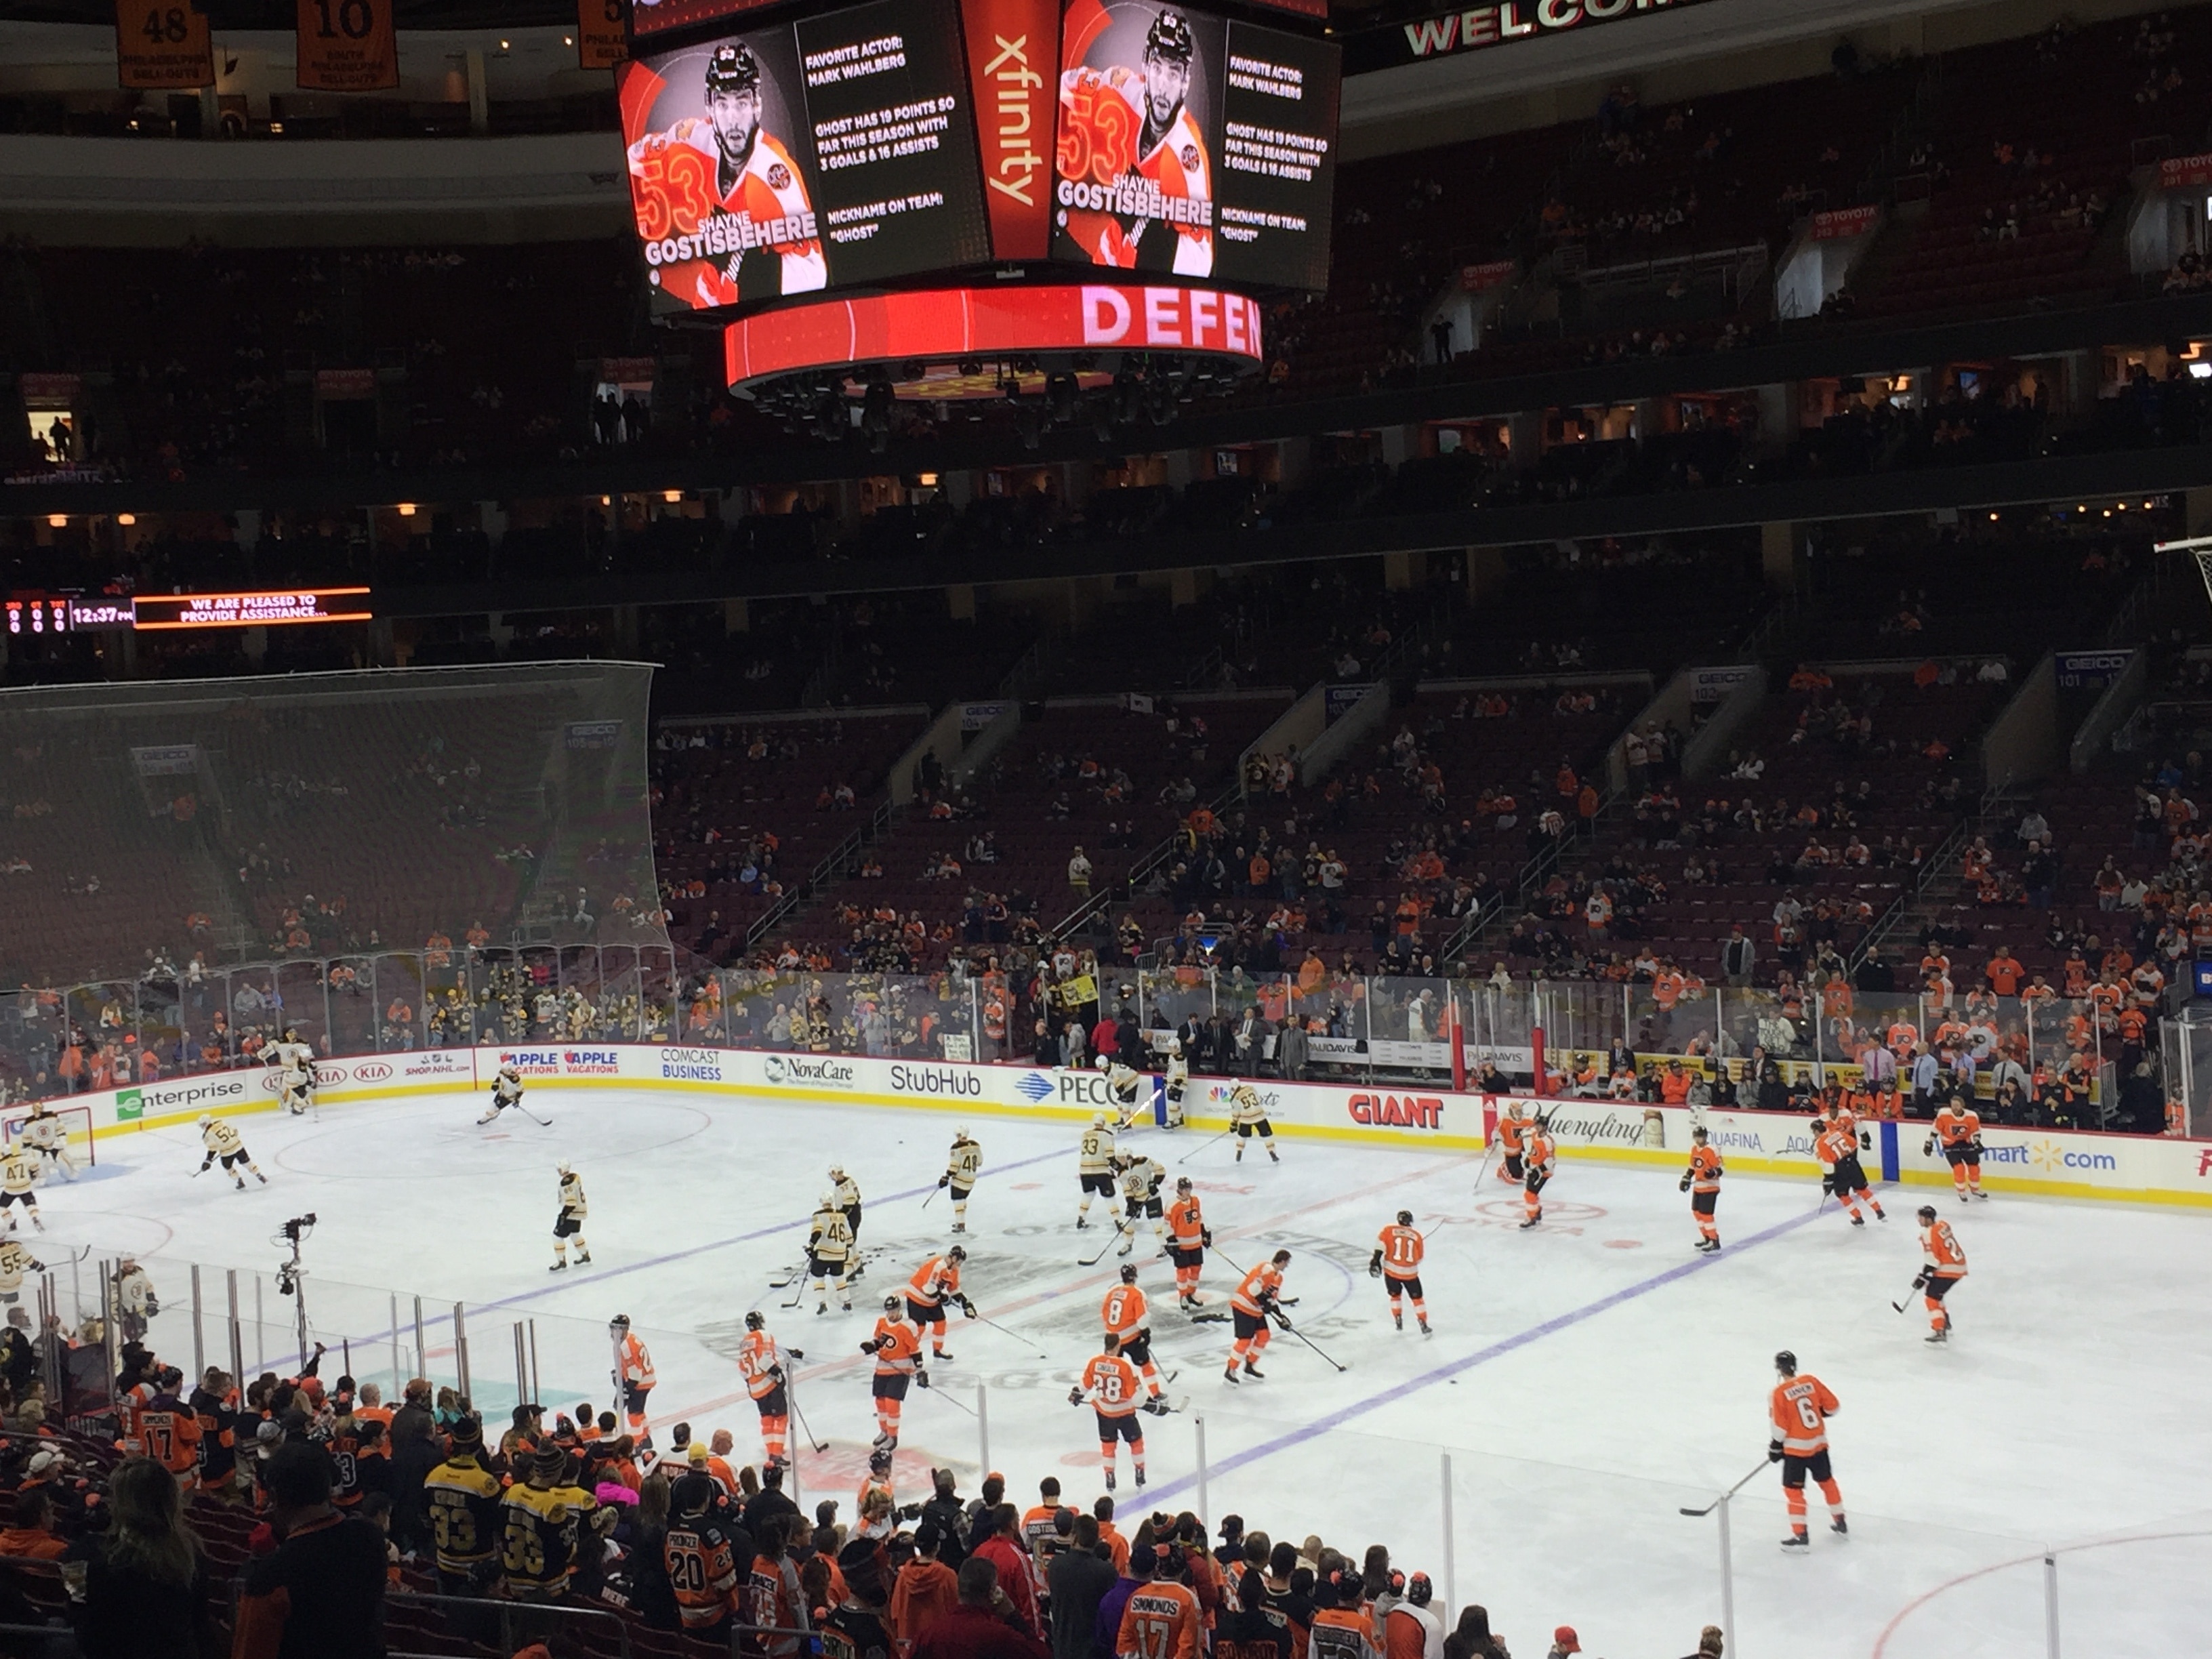 If you can, get club box seats at the Flyers game for a great view and intimate bar and private restrooms, away from the crowds. 